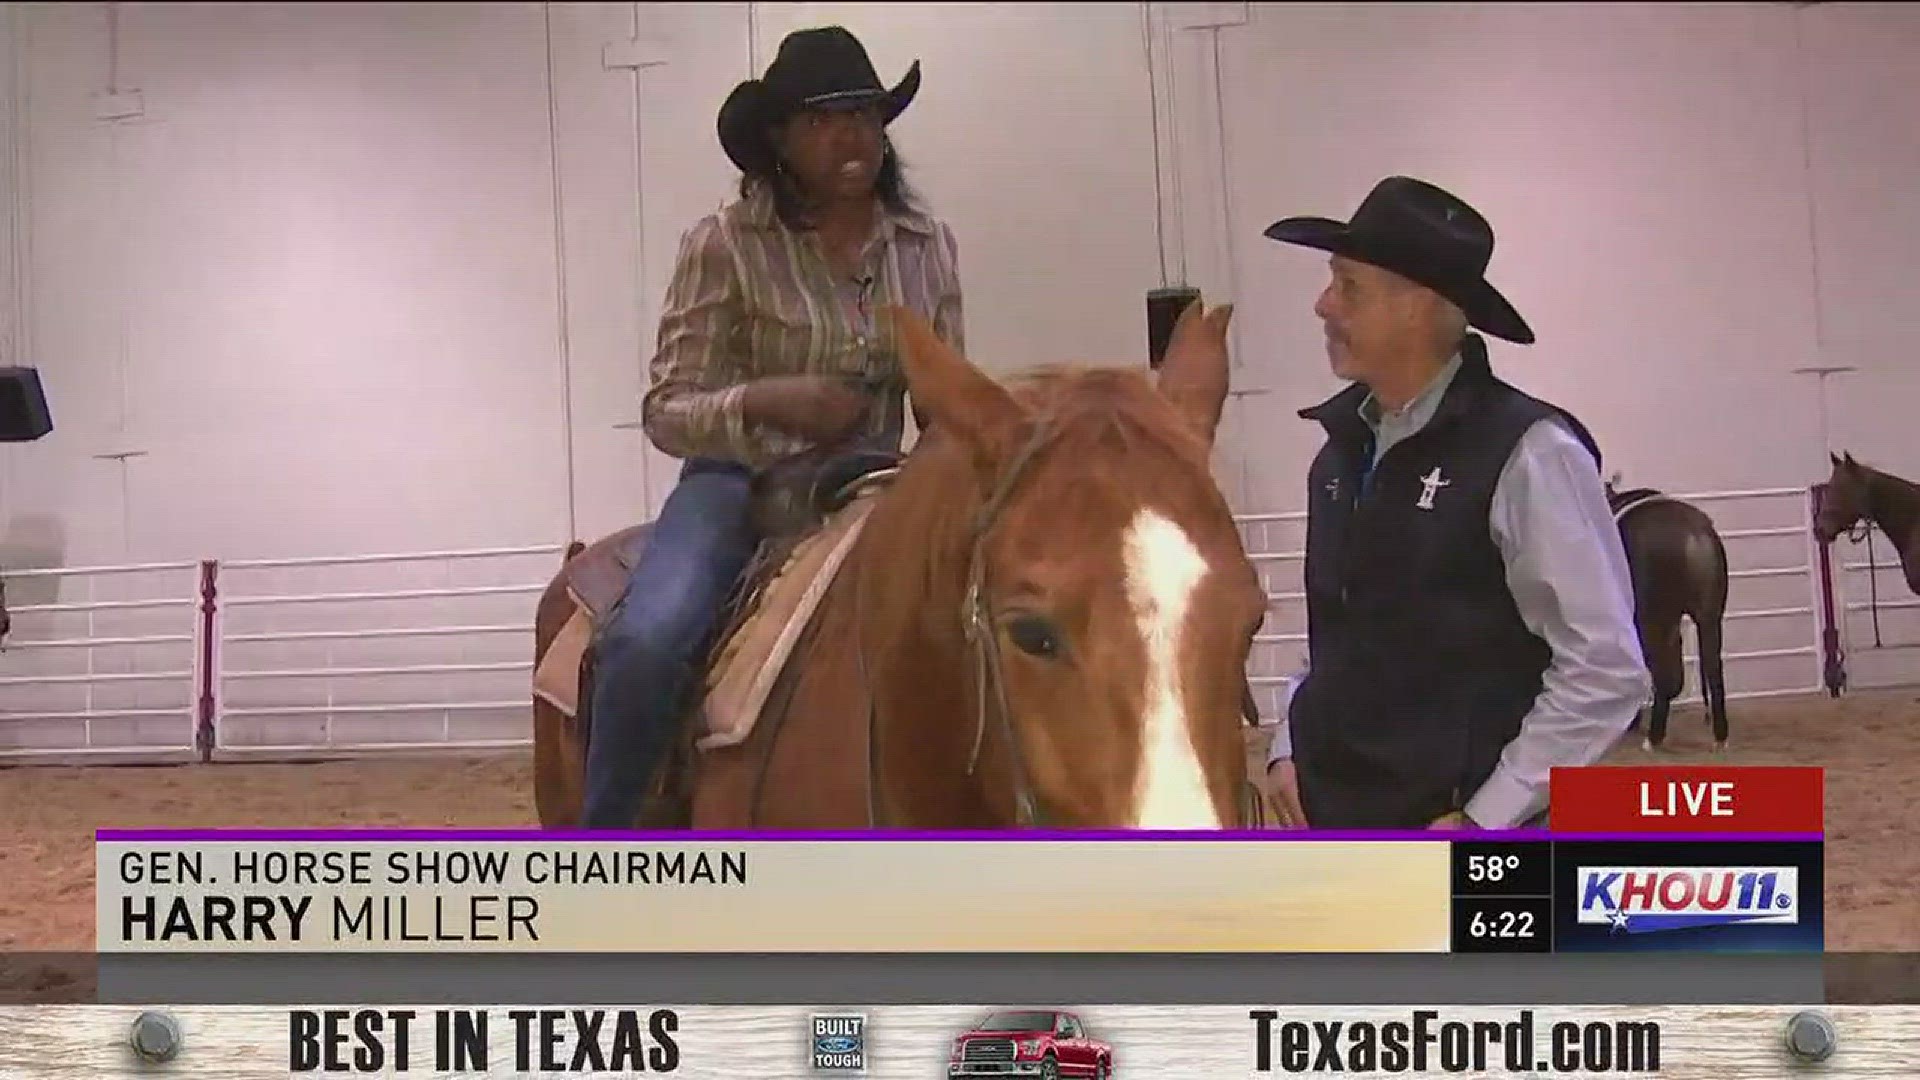 RodeoHouston is the place for one of the more prestigious horse shows in the entire world. Sherry Williams was in NRG Arena living her annual dream of being a cowgirl.